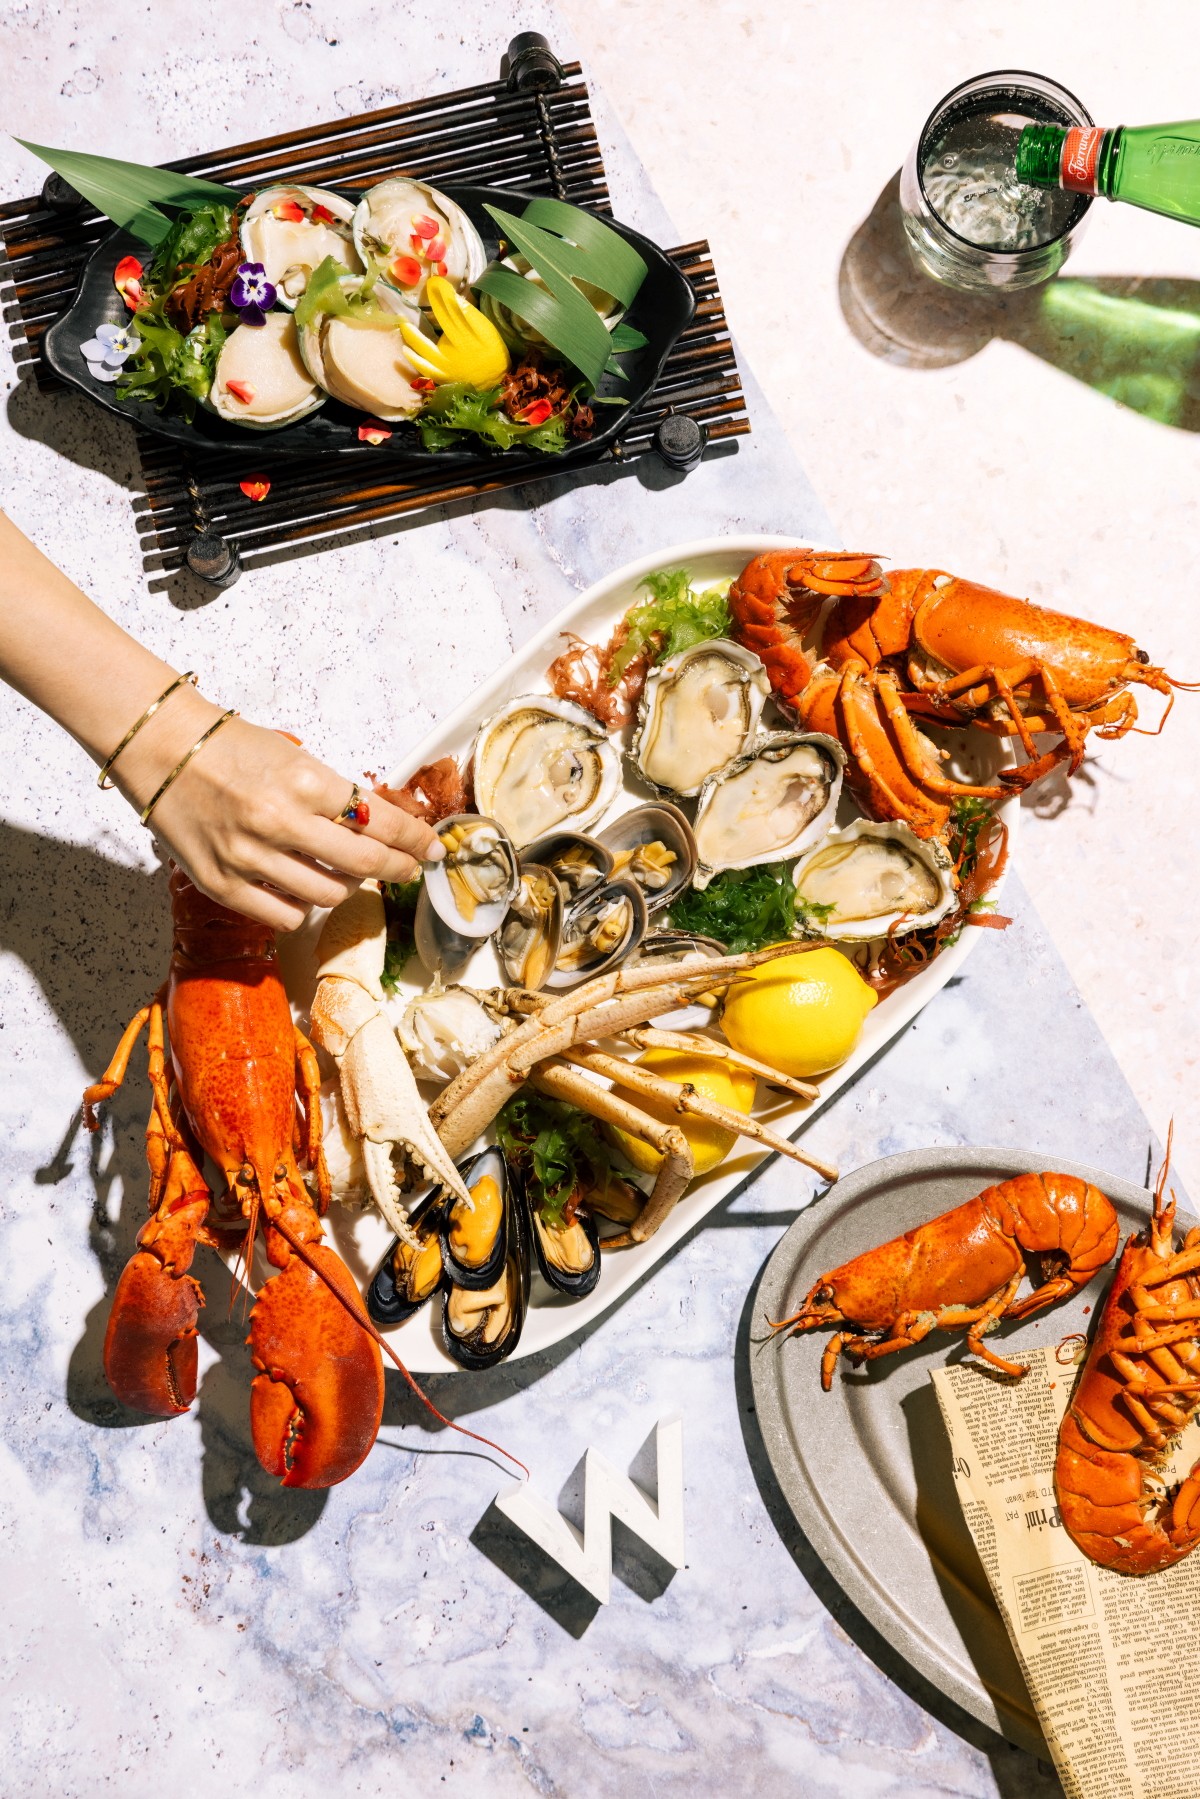 A seafood platter fit for a king ... or your dad. Photo: W Hong Kong